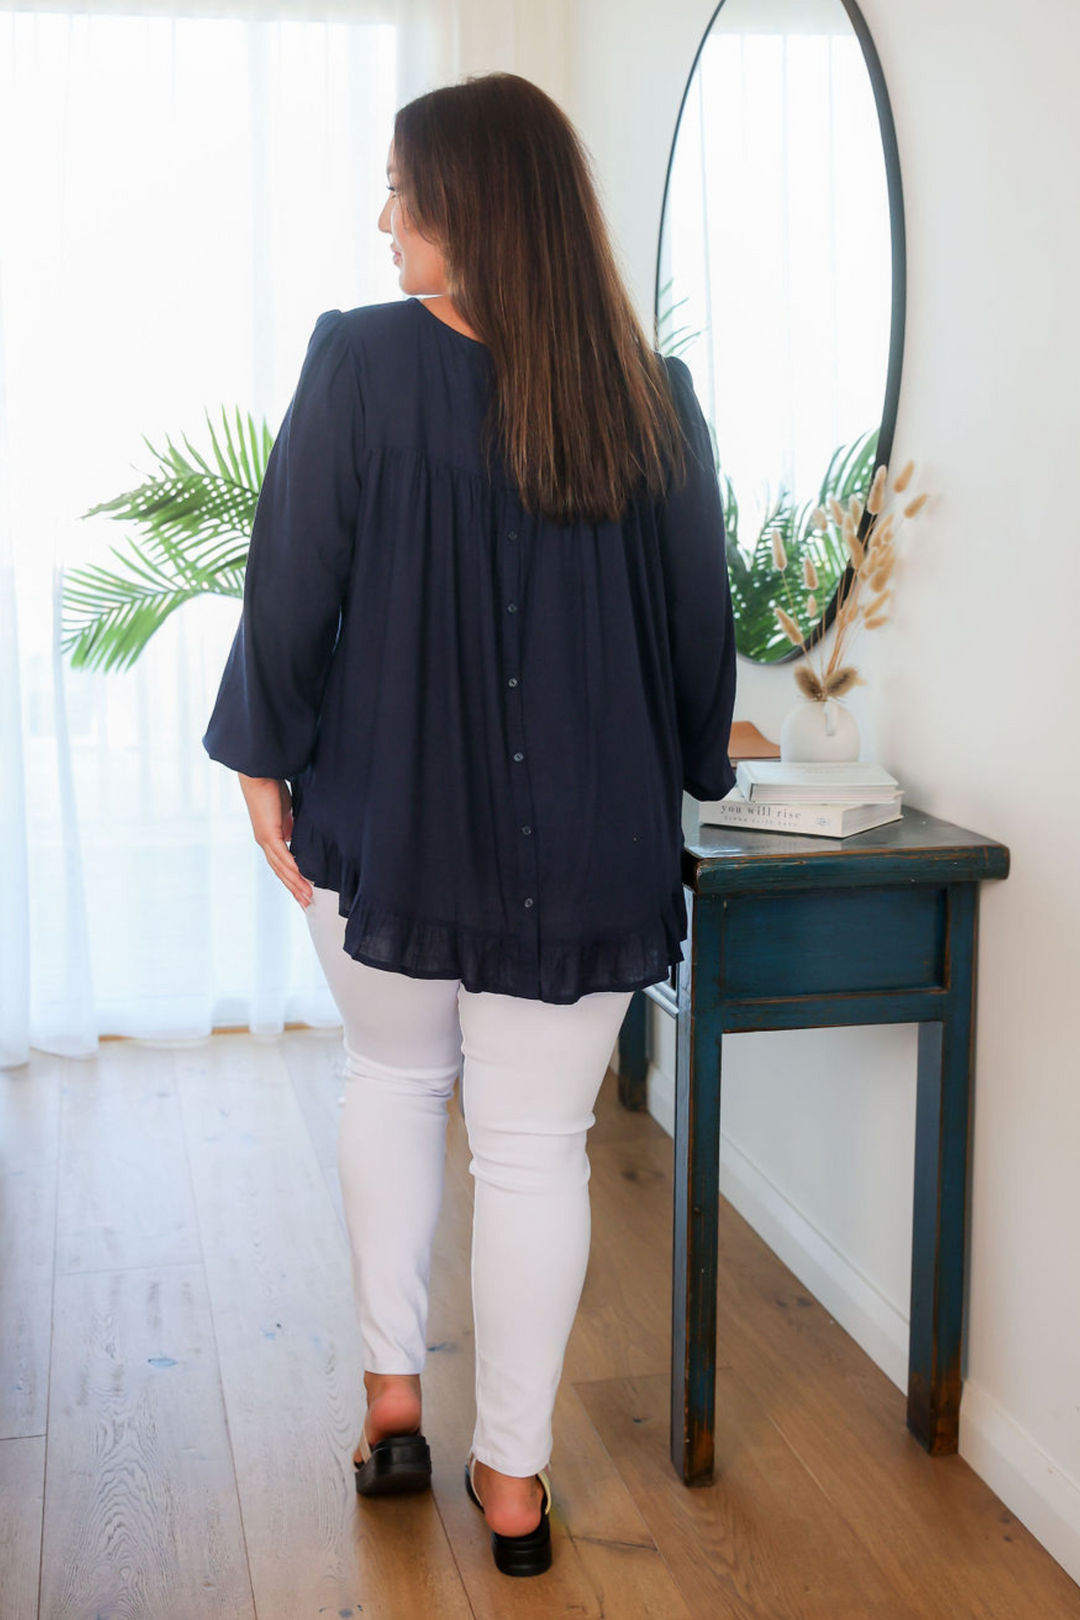 Ladies Long Sleeve Button Back Top - Round Neckline - Flowing Style - Navy - Sizes S/M - Xl/XXL - Mila Button Back Top Back Full Length View Size L/XL Paired with Delta White Jeans Daisy's Closet